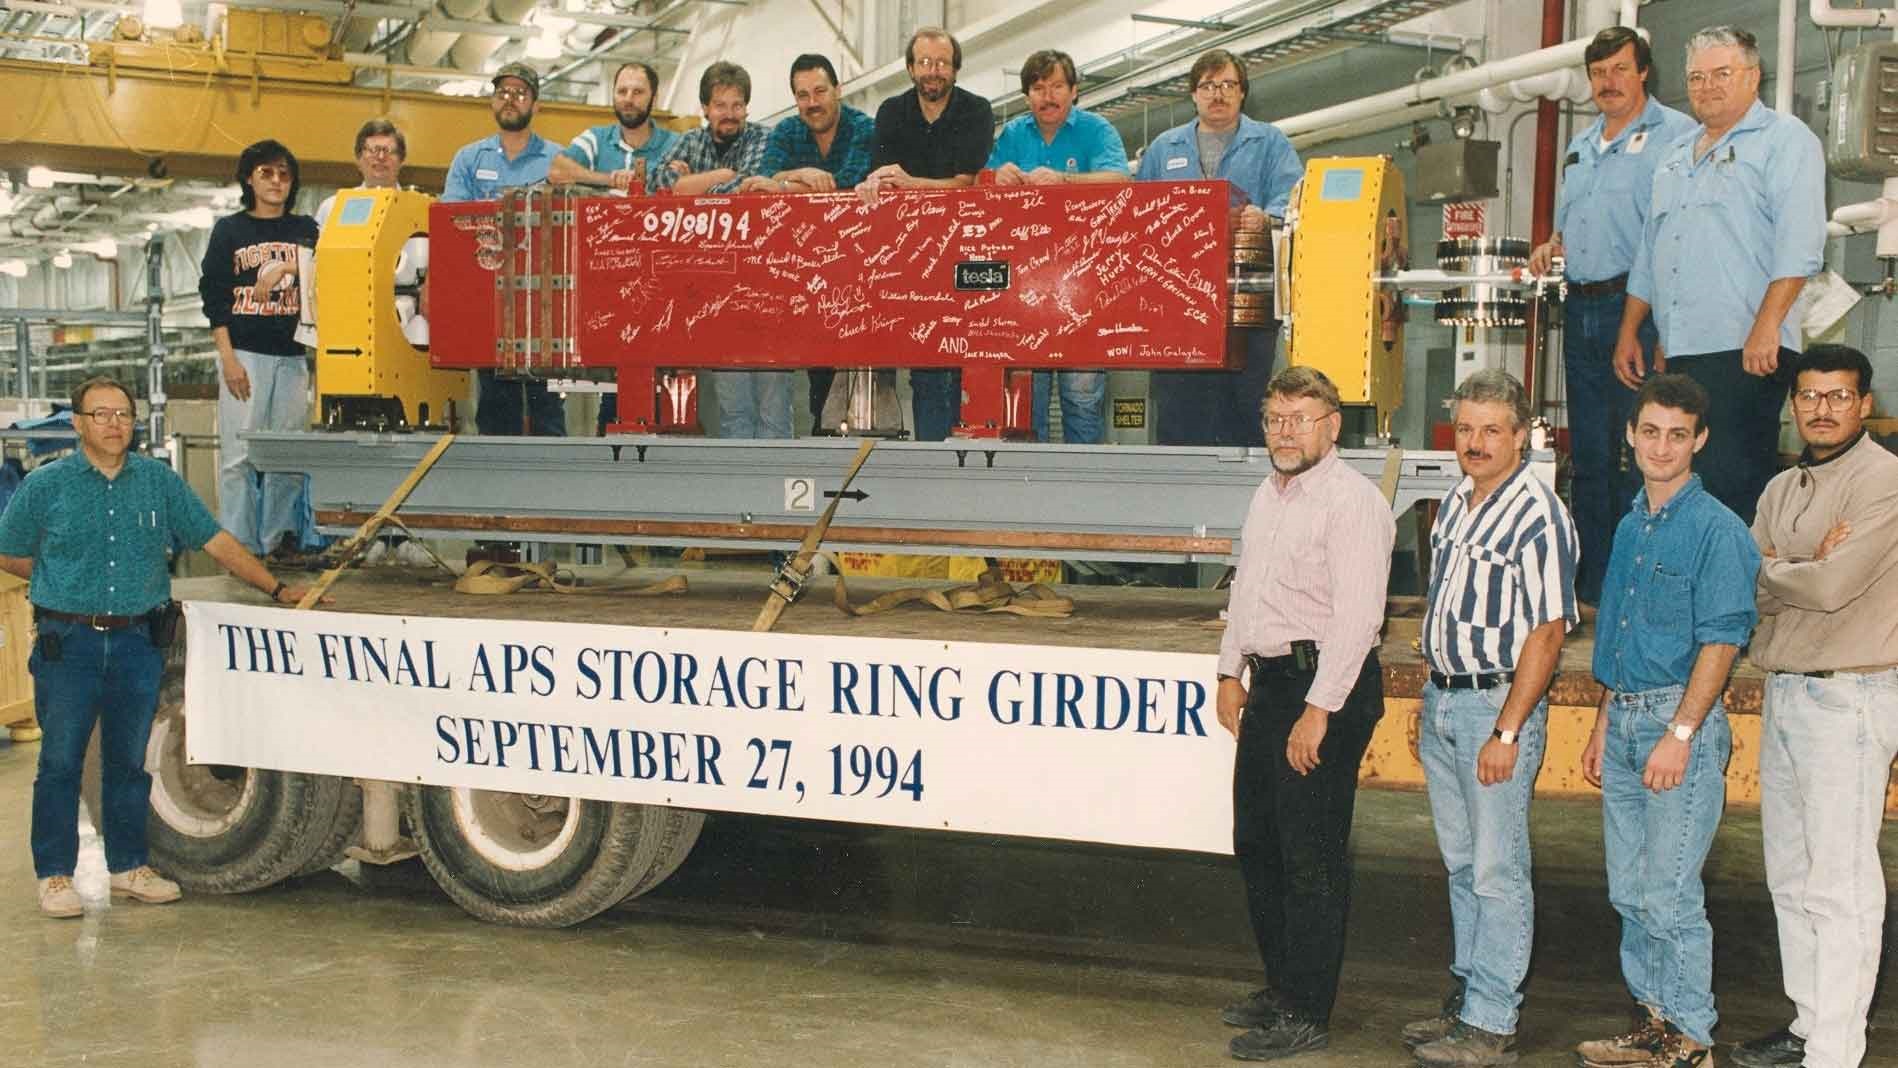 nstallation of the original final APS storage ring girder in 1994. (Image by Argonne National Laboratory.)